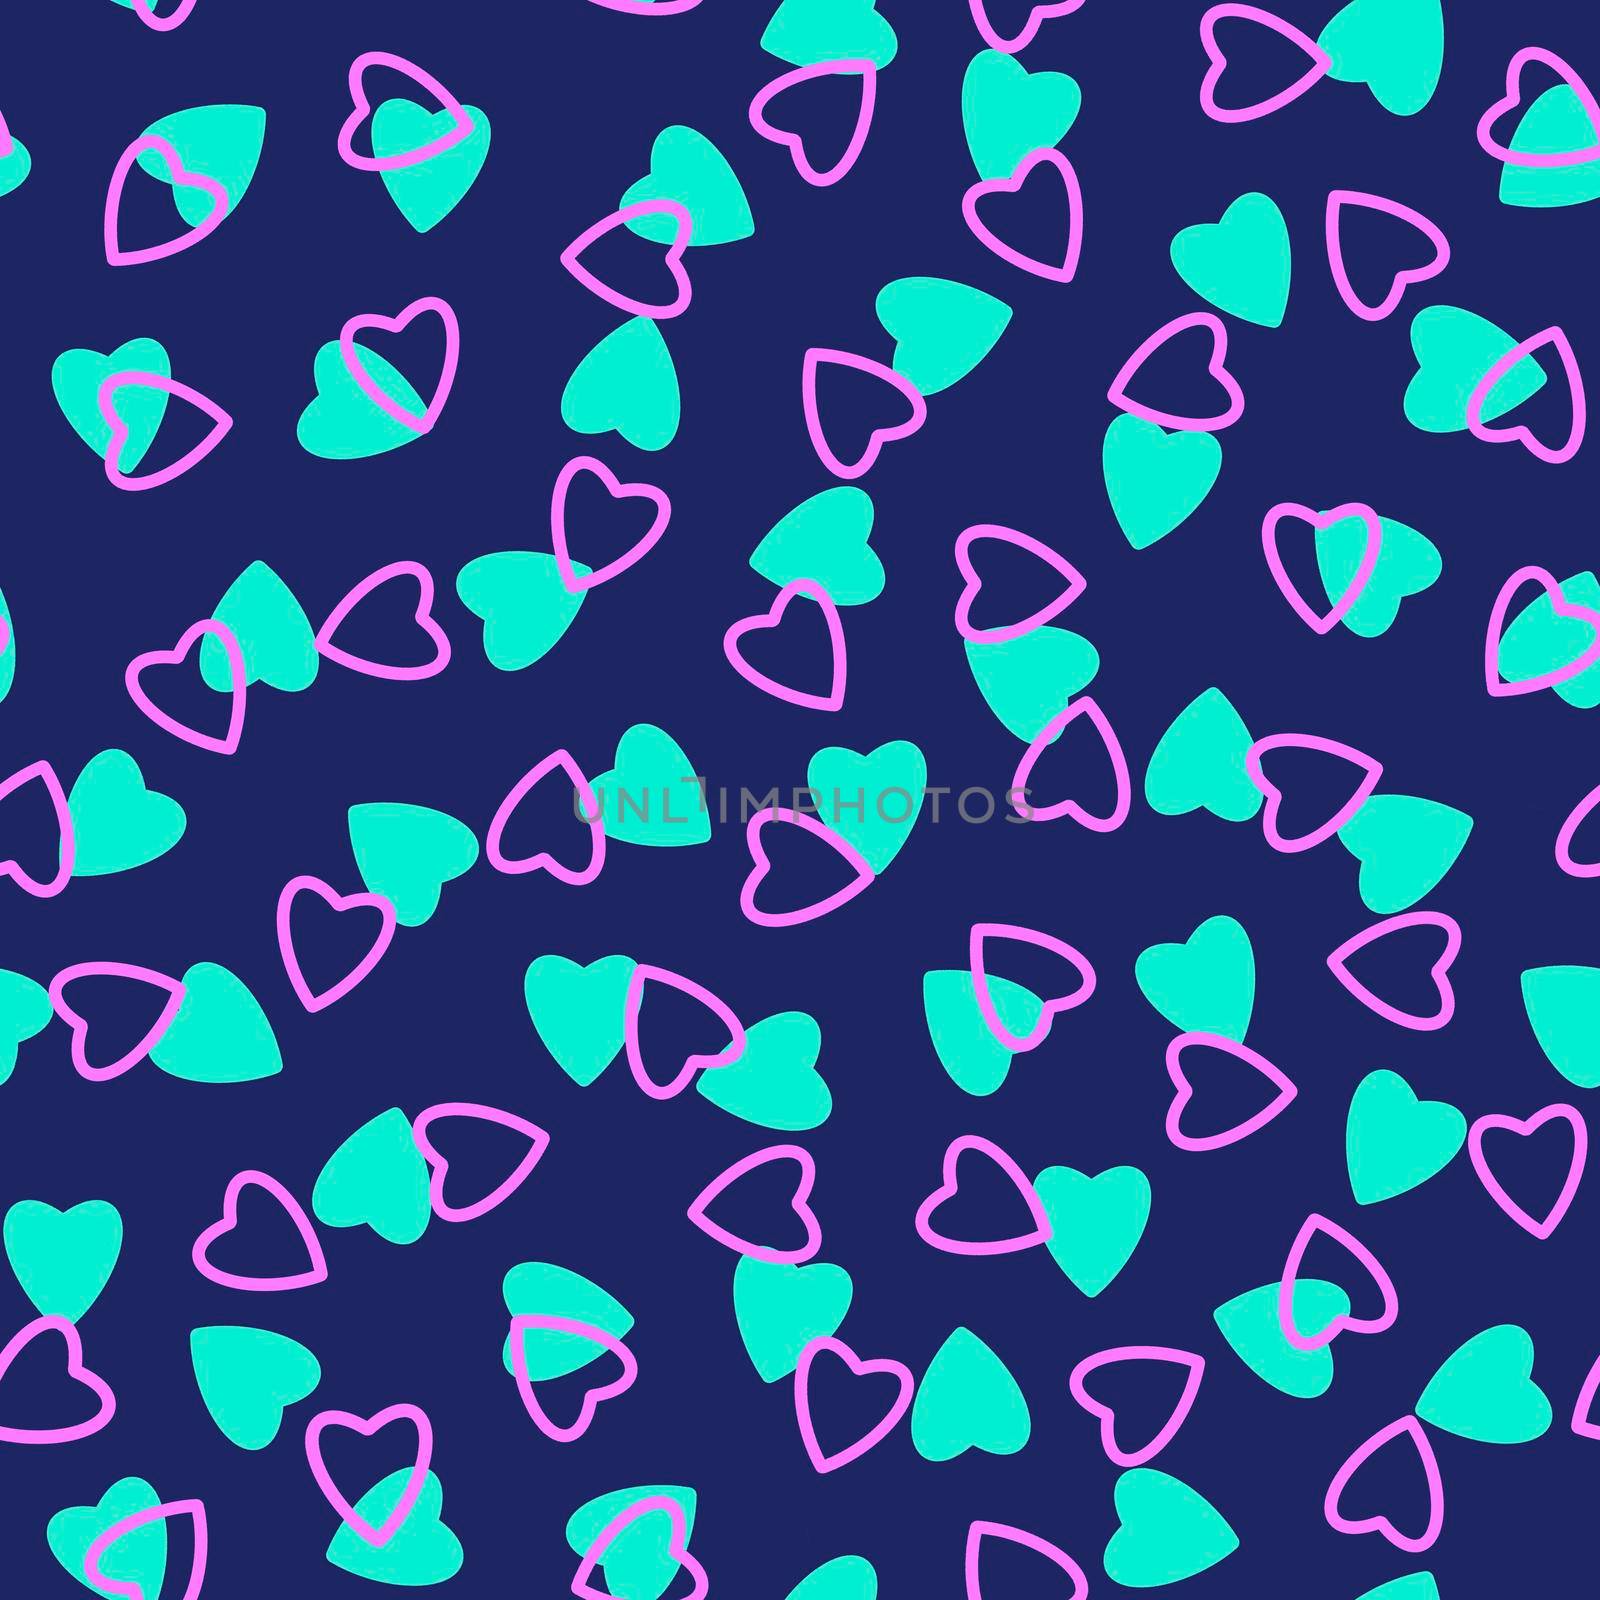 Simple hearts seamless pattern,endless chaotic texture made of tiny heart silhouettes.Valentines,mothers day background.Great for Easter,wedding,scrapbook,gift wrapping paper,textiles.Azure,lilac,blue by Angelsmoon